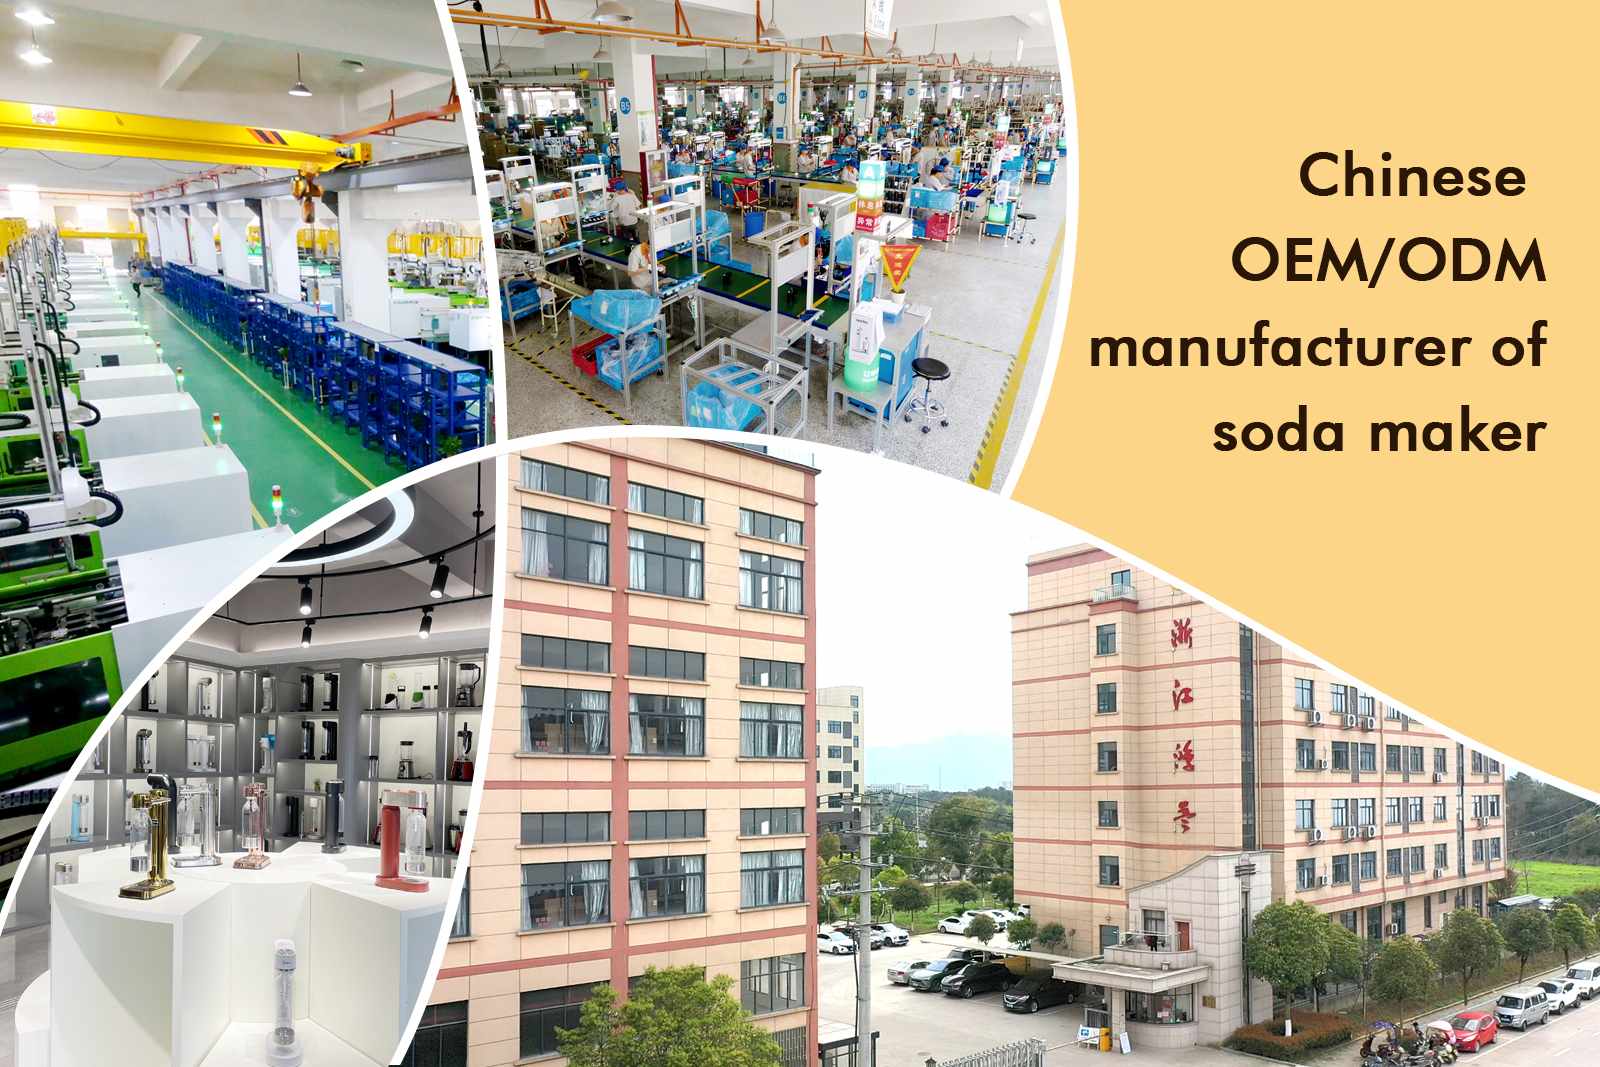 Chinese OEM/ODM manufacturer